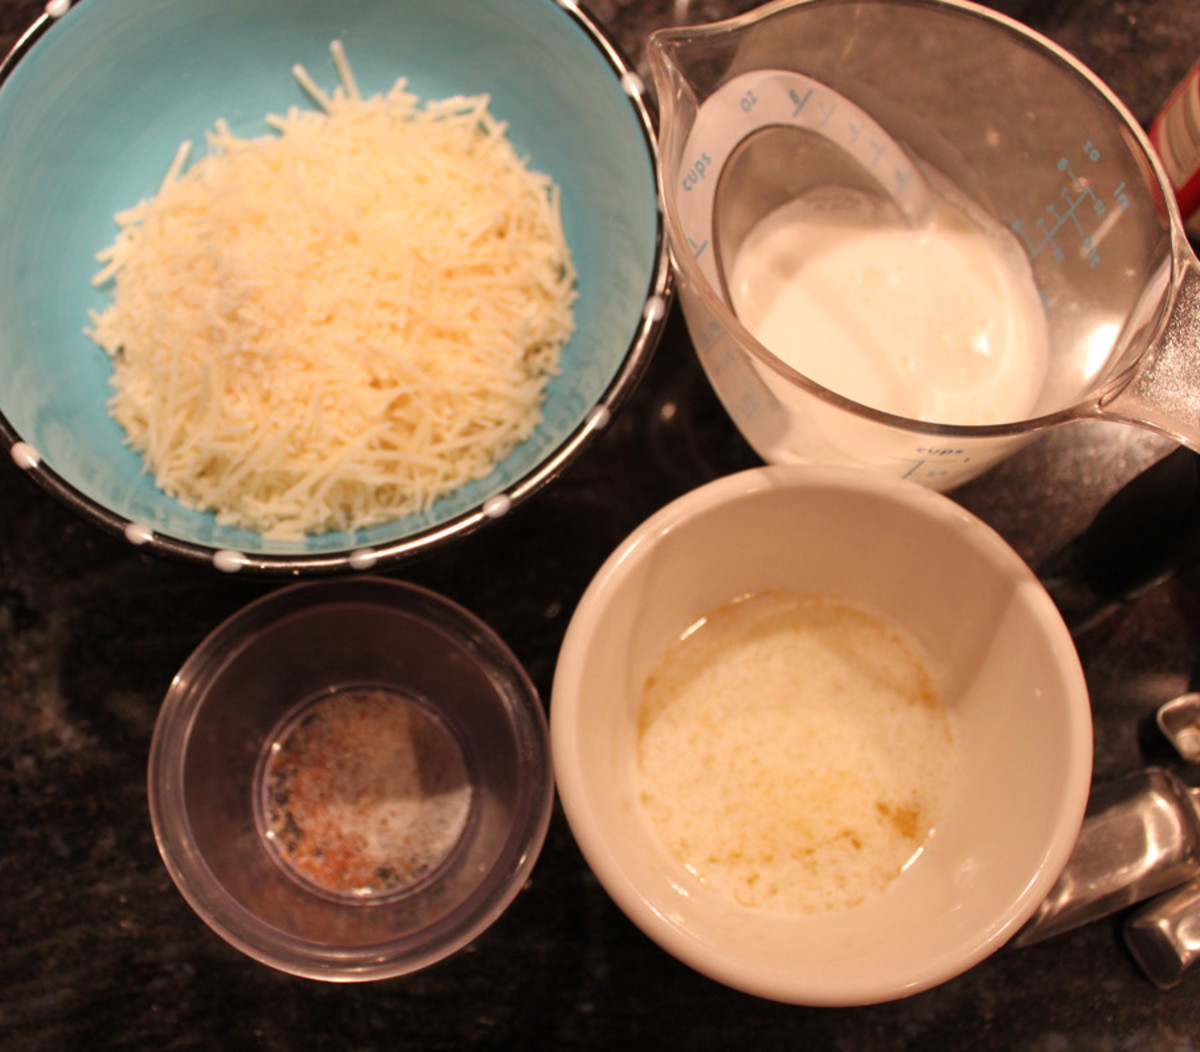 Measure out your ingredients to start.  Clockwise from upper left:  Parmesan cheese, cream, melted butter, spices.